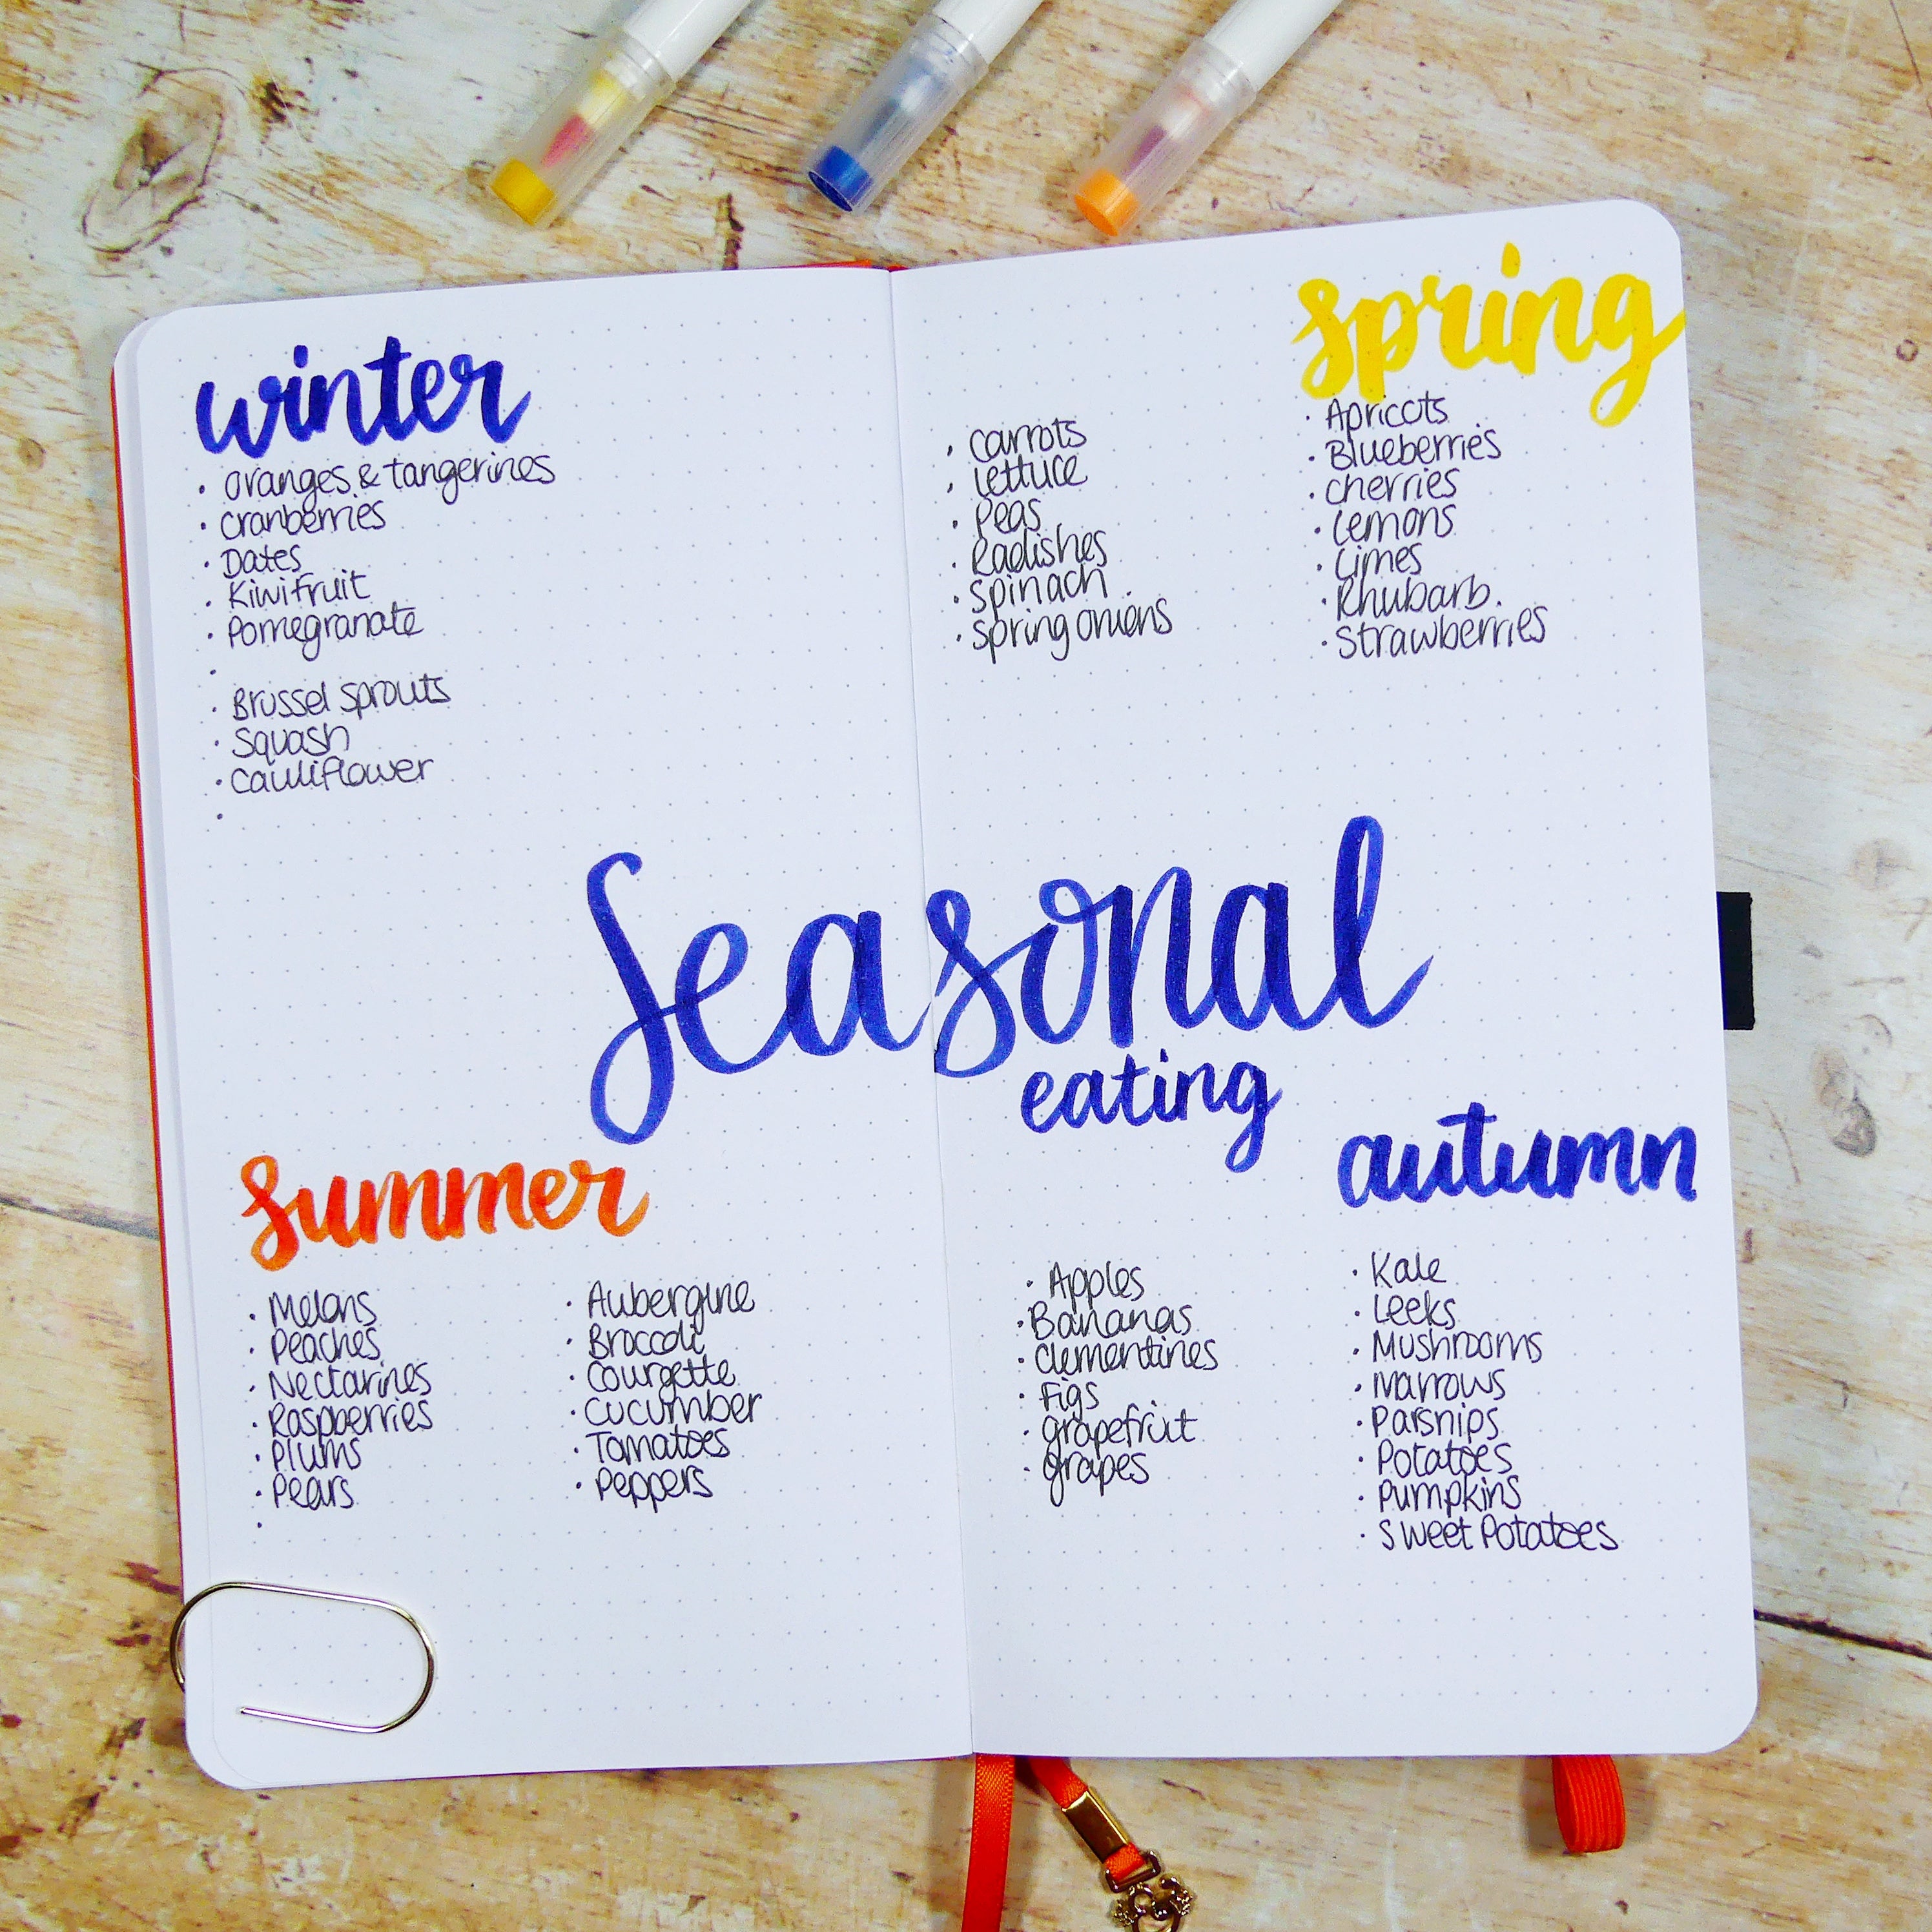 Central header ‘seasonal eating’ with each season around the page followed by a list of seasonal foods available 